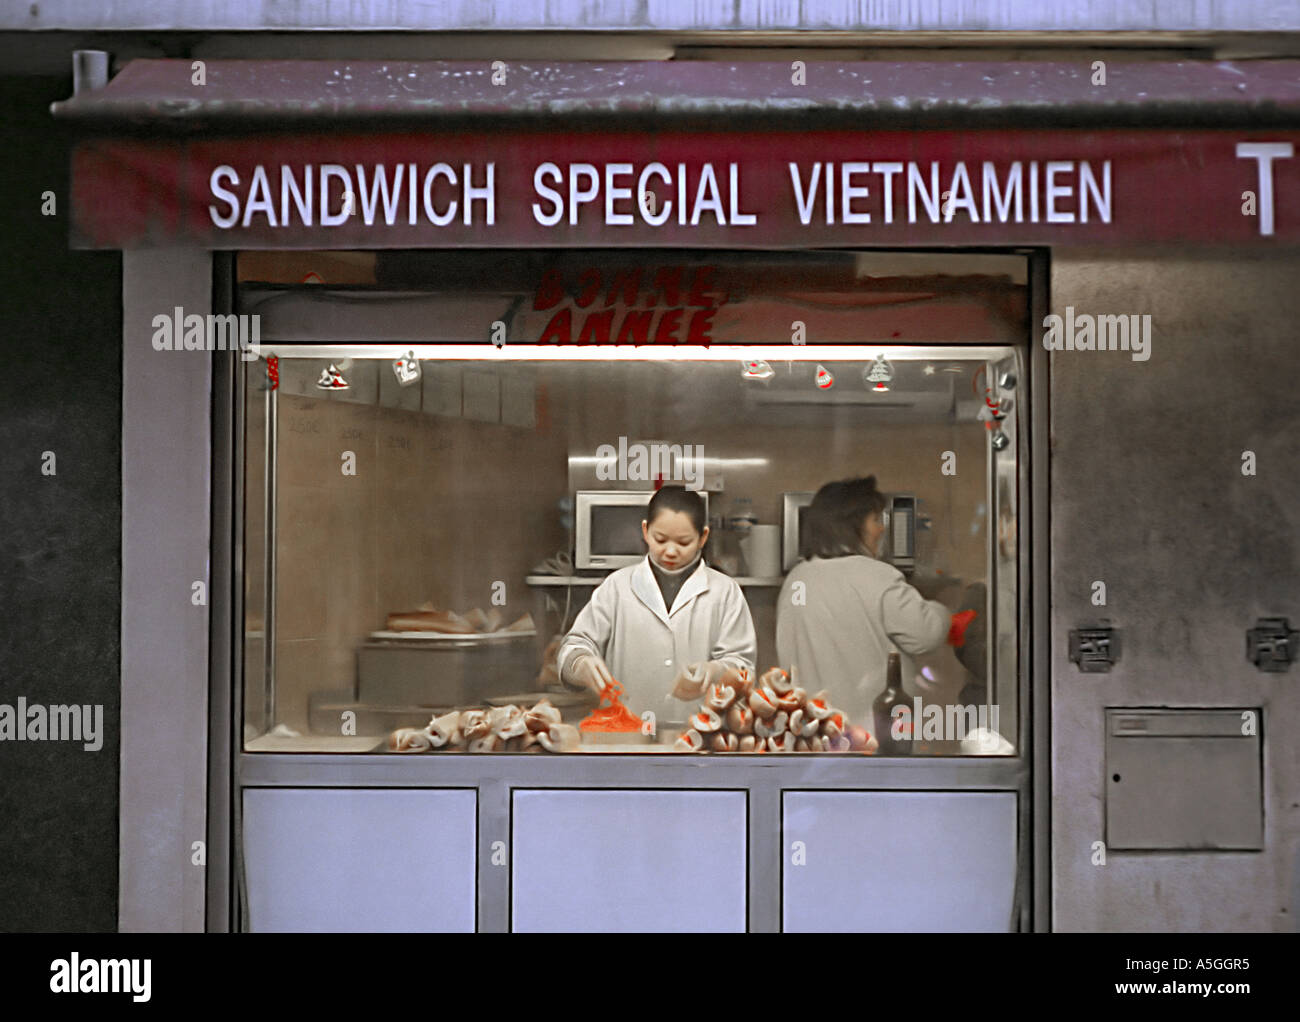 An employee prepares sandwiches in a Vietnamese restaurant in the 13th district of Paris Stock Photo